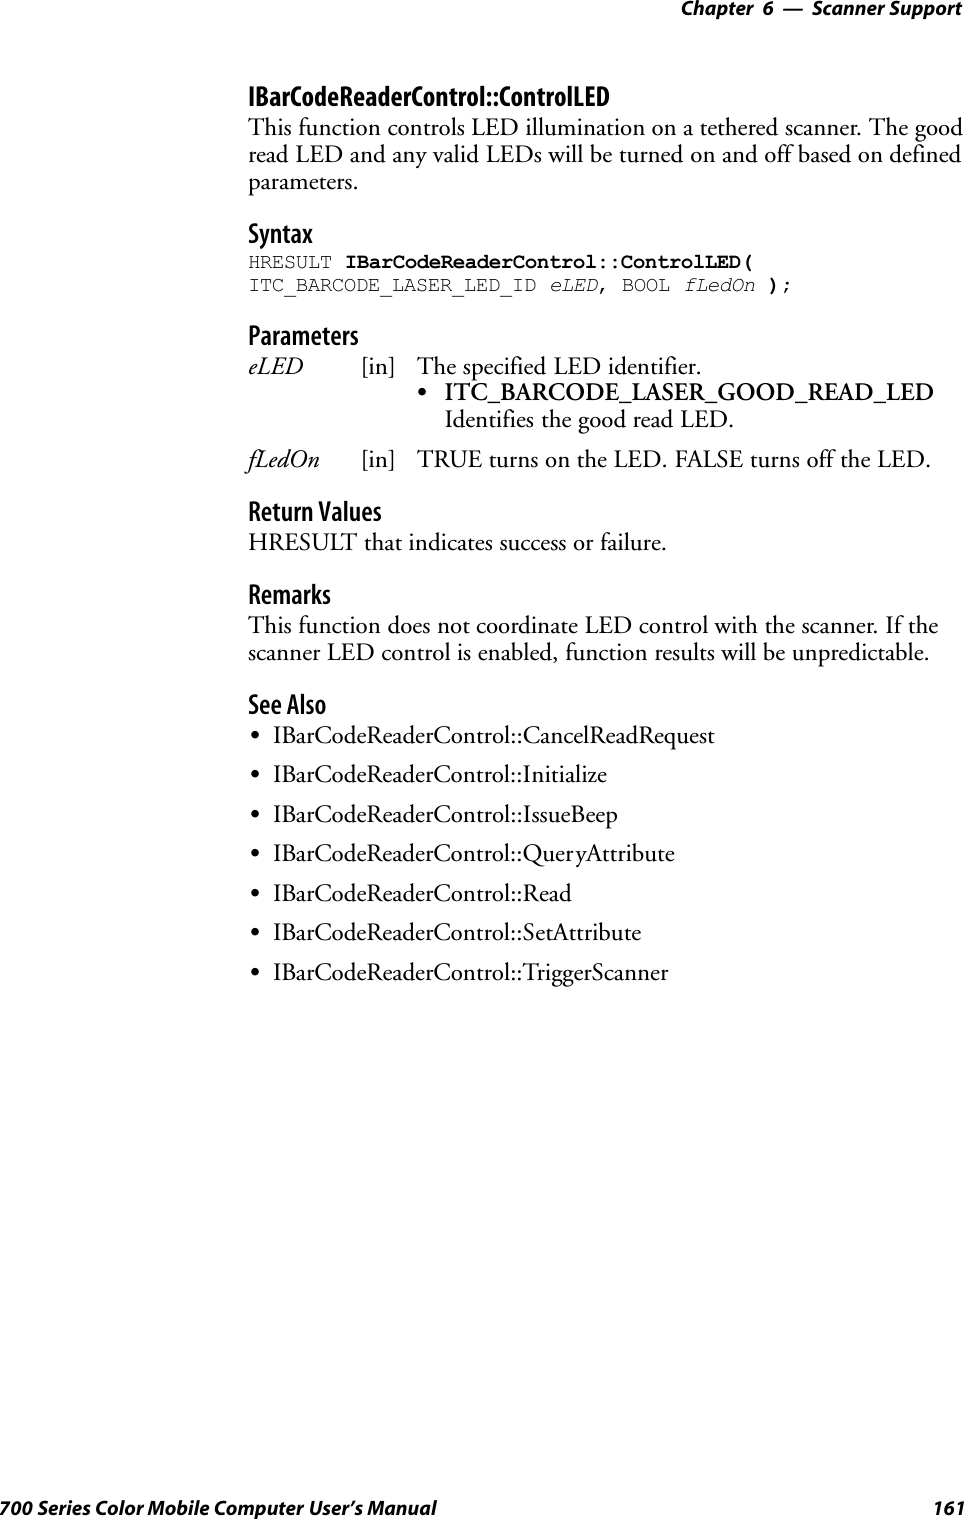 6 Scanner Support—Chapter161700 Series Color Mobile Computer User’s ManualIBarCodeReaderControl::ControlLEDThis function controls LED illumination on a tethered scanner. The goodread LED and any valid LEDs will be turned on and off based on definedparameters.SyntaxHRESULT IBarCodeReaderControl::ControlLED(ITC_BARCODE_LASER_LED_ID eLED, BOOL fLedOn );ParameterseLED [in] The specified LED identifier.SITC_BARCODE_LASER_GOOD_READ_LEDIdentifies the good read LED.fLedOn [in] TRUE turns on the LED. FALSE turns off the LED.Return ValuesHRESULT that indicates success or failure.RemarksThis function does not coordinate LED control with the scanner. If thescanner LED control is enabled, function results will be unpredictable.See AlsoSIBarCodeReaderControl::CancelReadRequestSIBarCodeReaderControl::InitializeSIBarCodeReaderControl::IssueBeepSIBarCodeReaderControl::QueryAttributeSIBarCodeReaderControl::ReadSIBarCodeReaderControl::SetAttributeSIBarCodeReaderControl::TriggerScanner